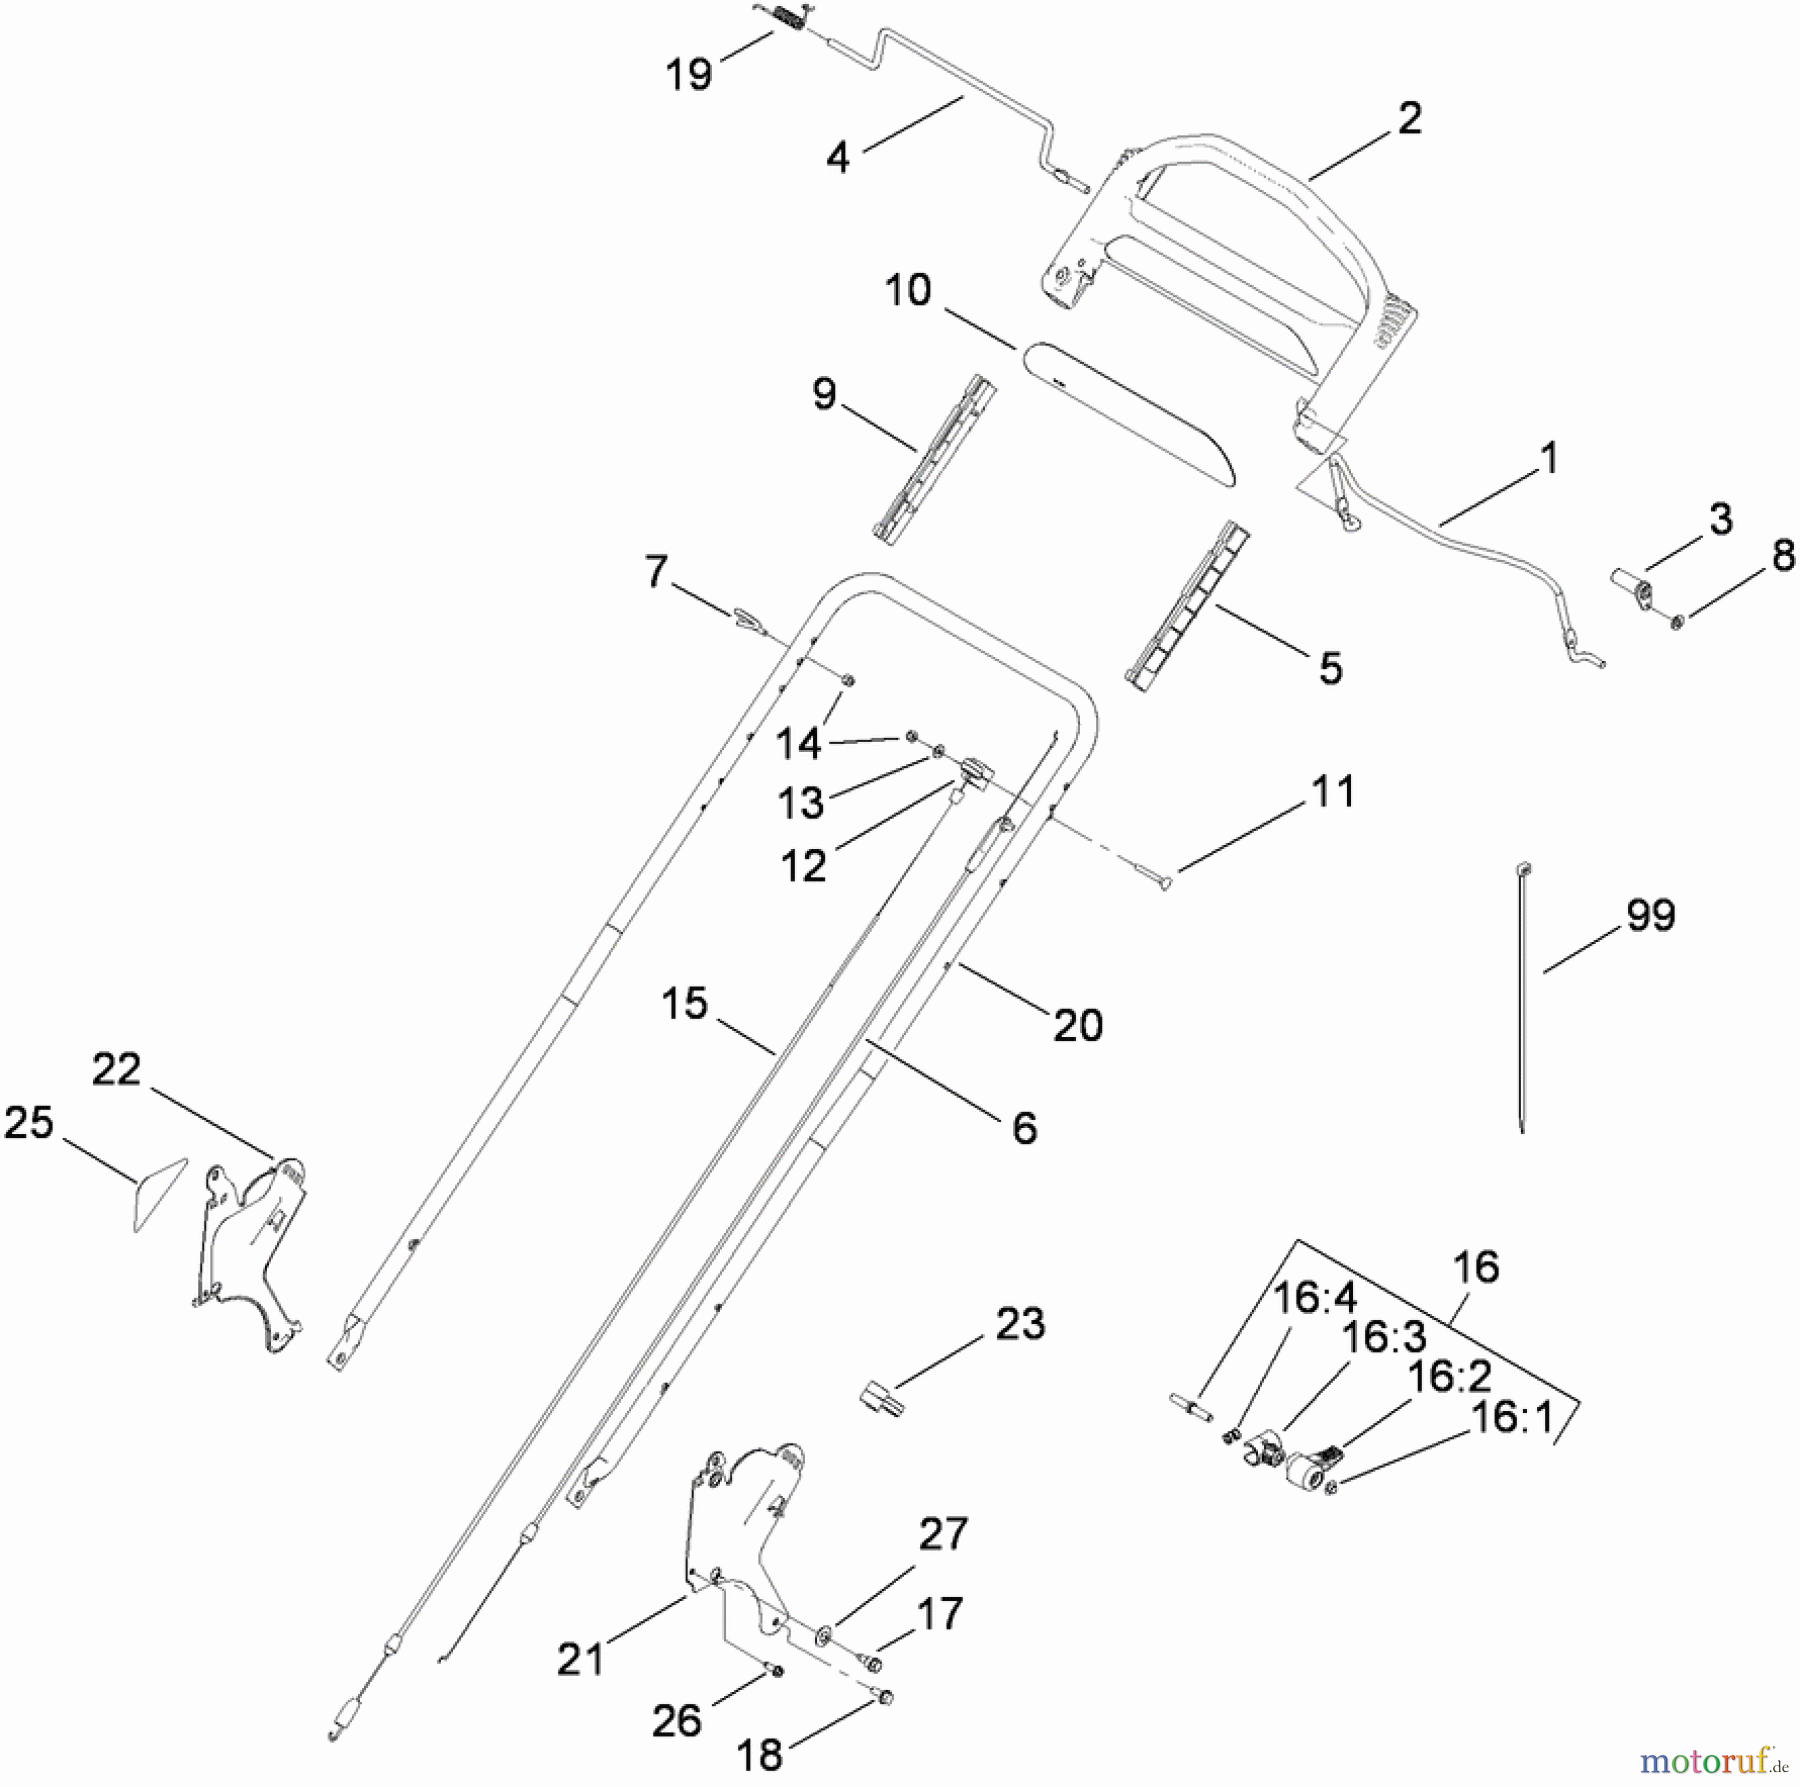  Toro Neu Mowers, Walk-Behind Seite 1 20099 - Toro Super Recycler Lawn Mower, 2009 (290000001-290999999) HANDLE AND CONTROL ASSEMBLY